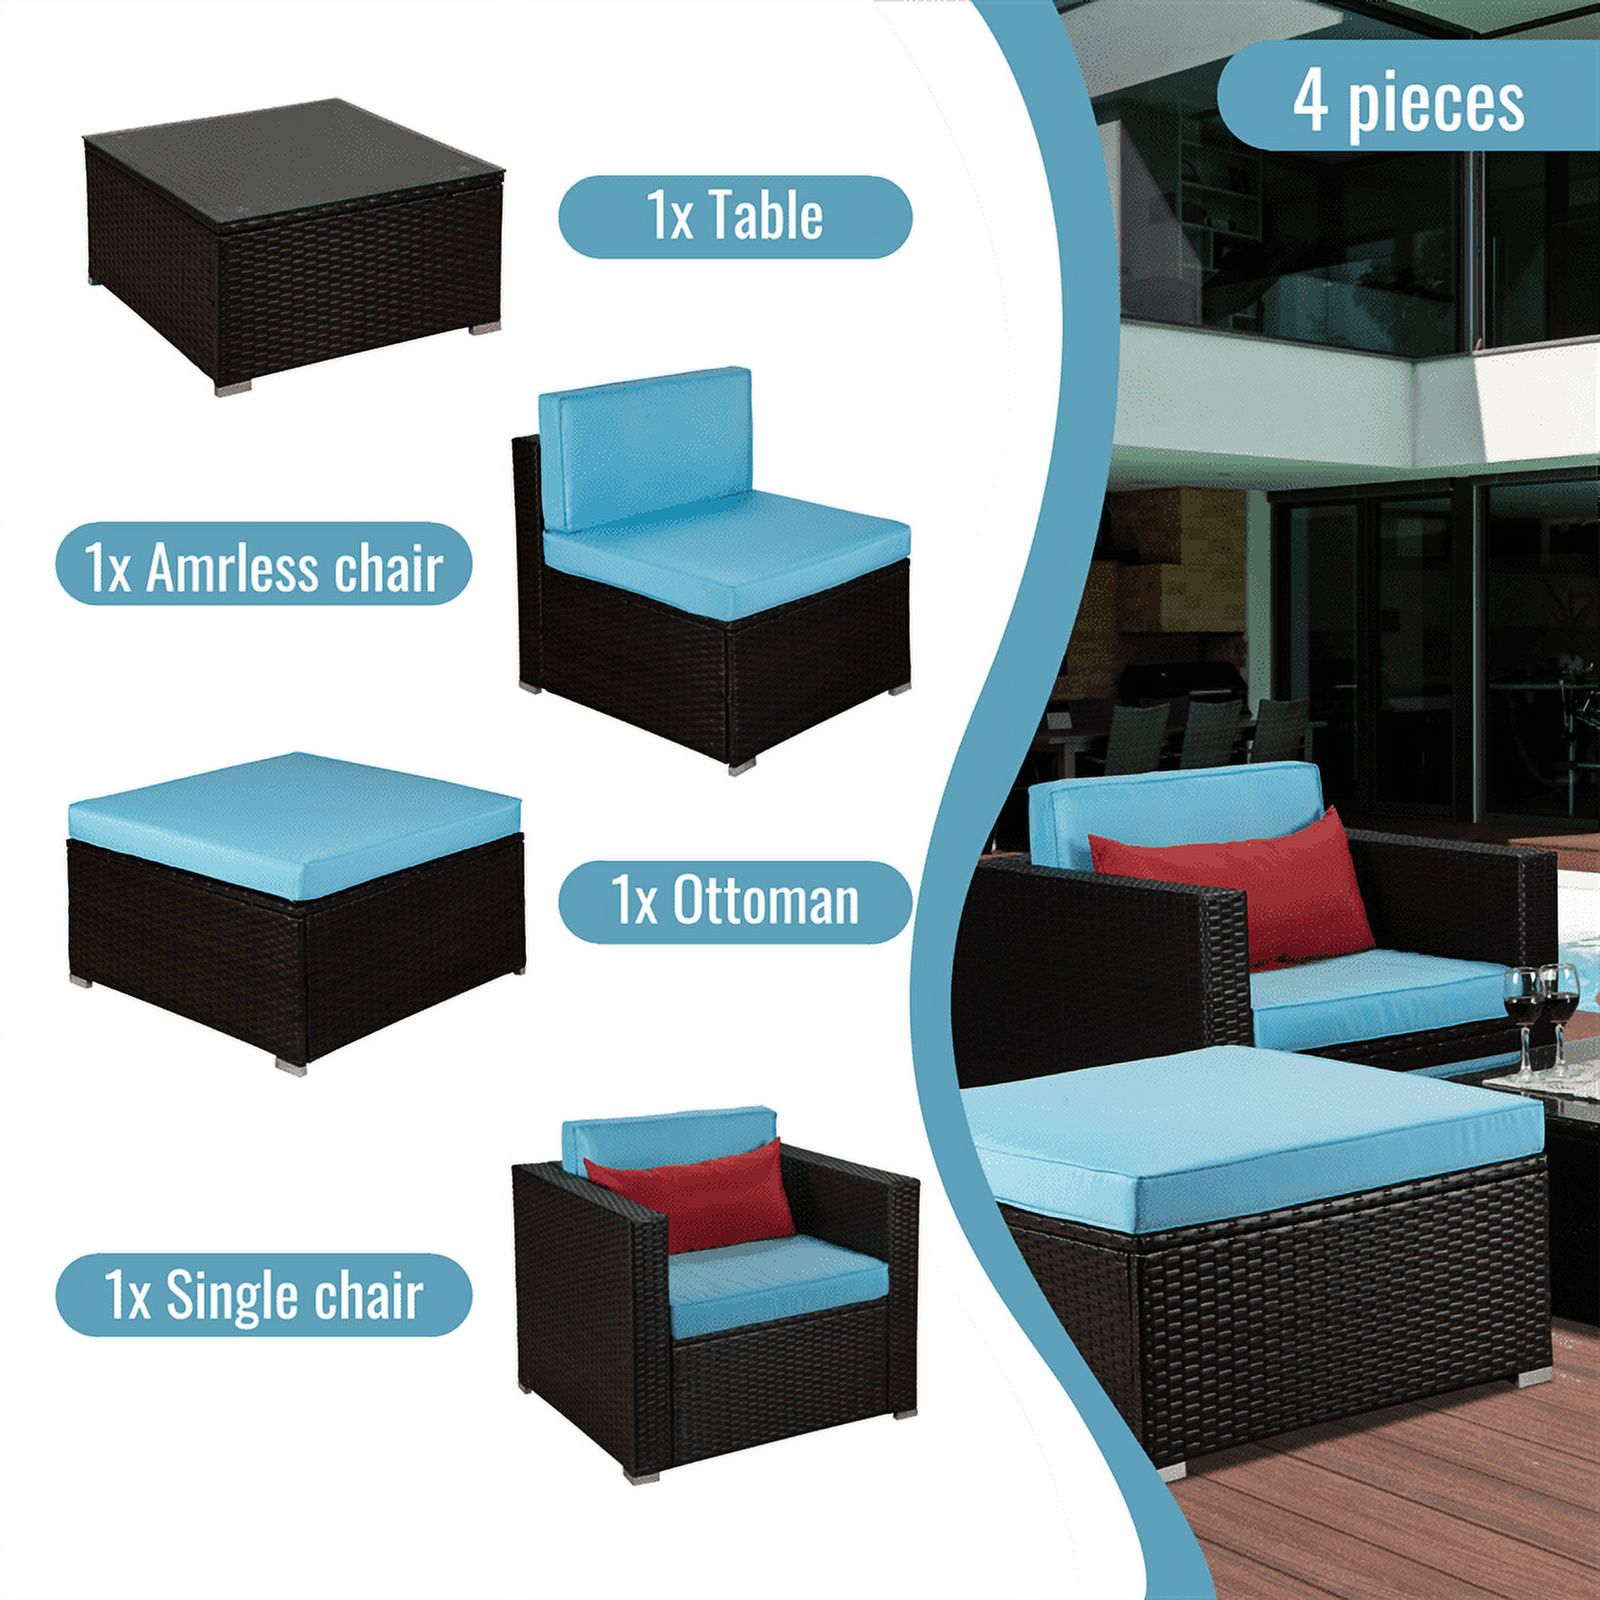 4 Pieces Patio Furniture Set, Outdoor Wicker Rattan Sectional Sofa Couch Set with Coffee Table & Ottoman and 2 Chairs All Weather Conversation Set with Blue Cushions for Garden Backyard, Brown - image 3 of 7